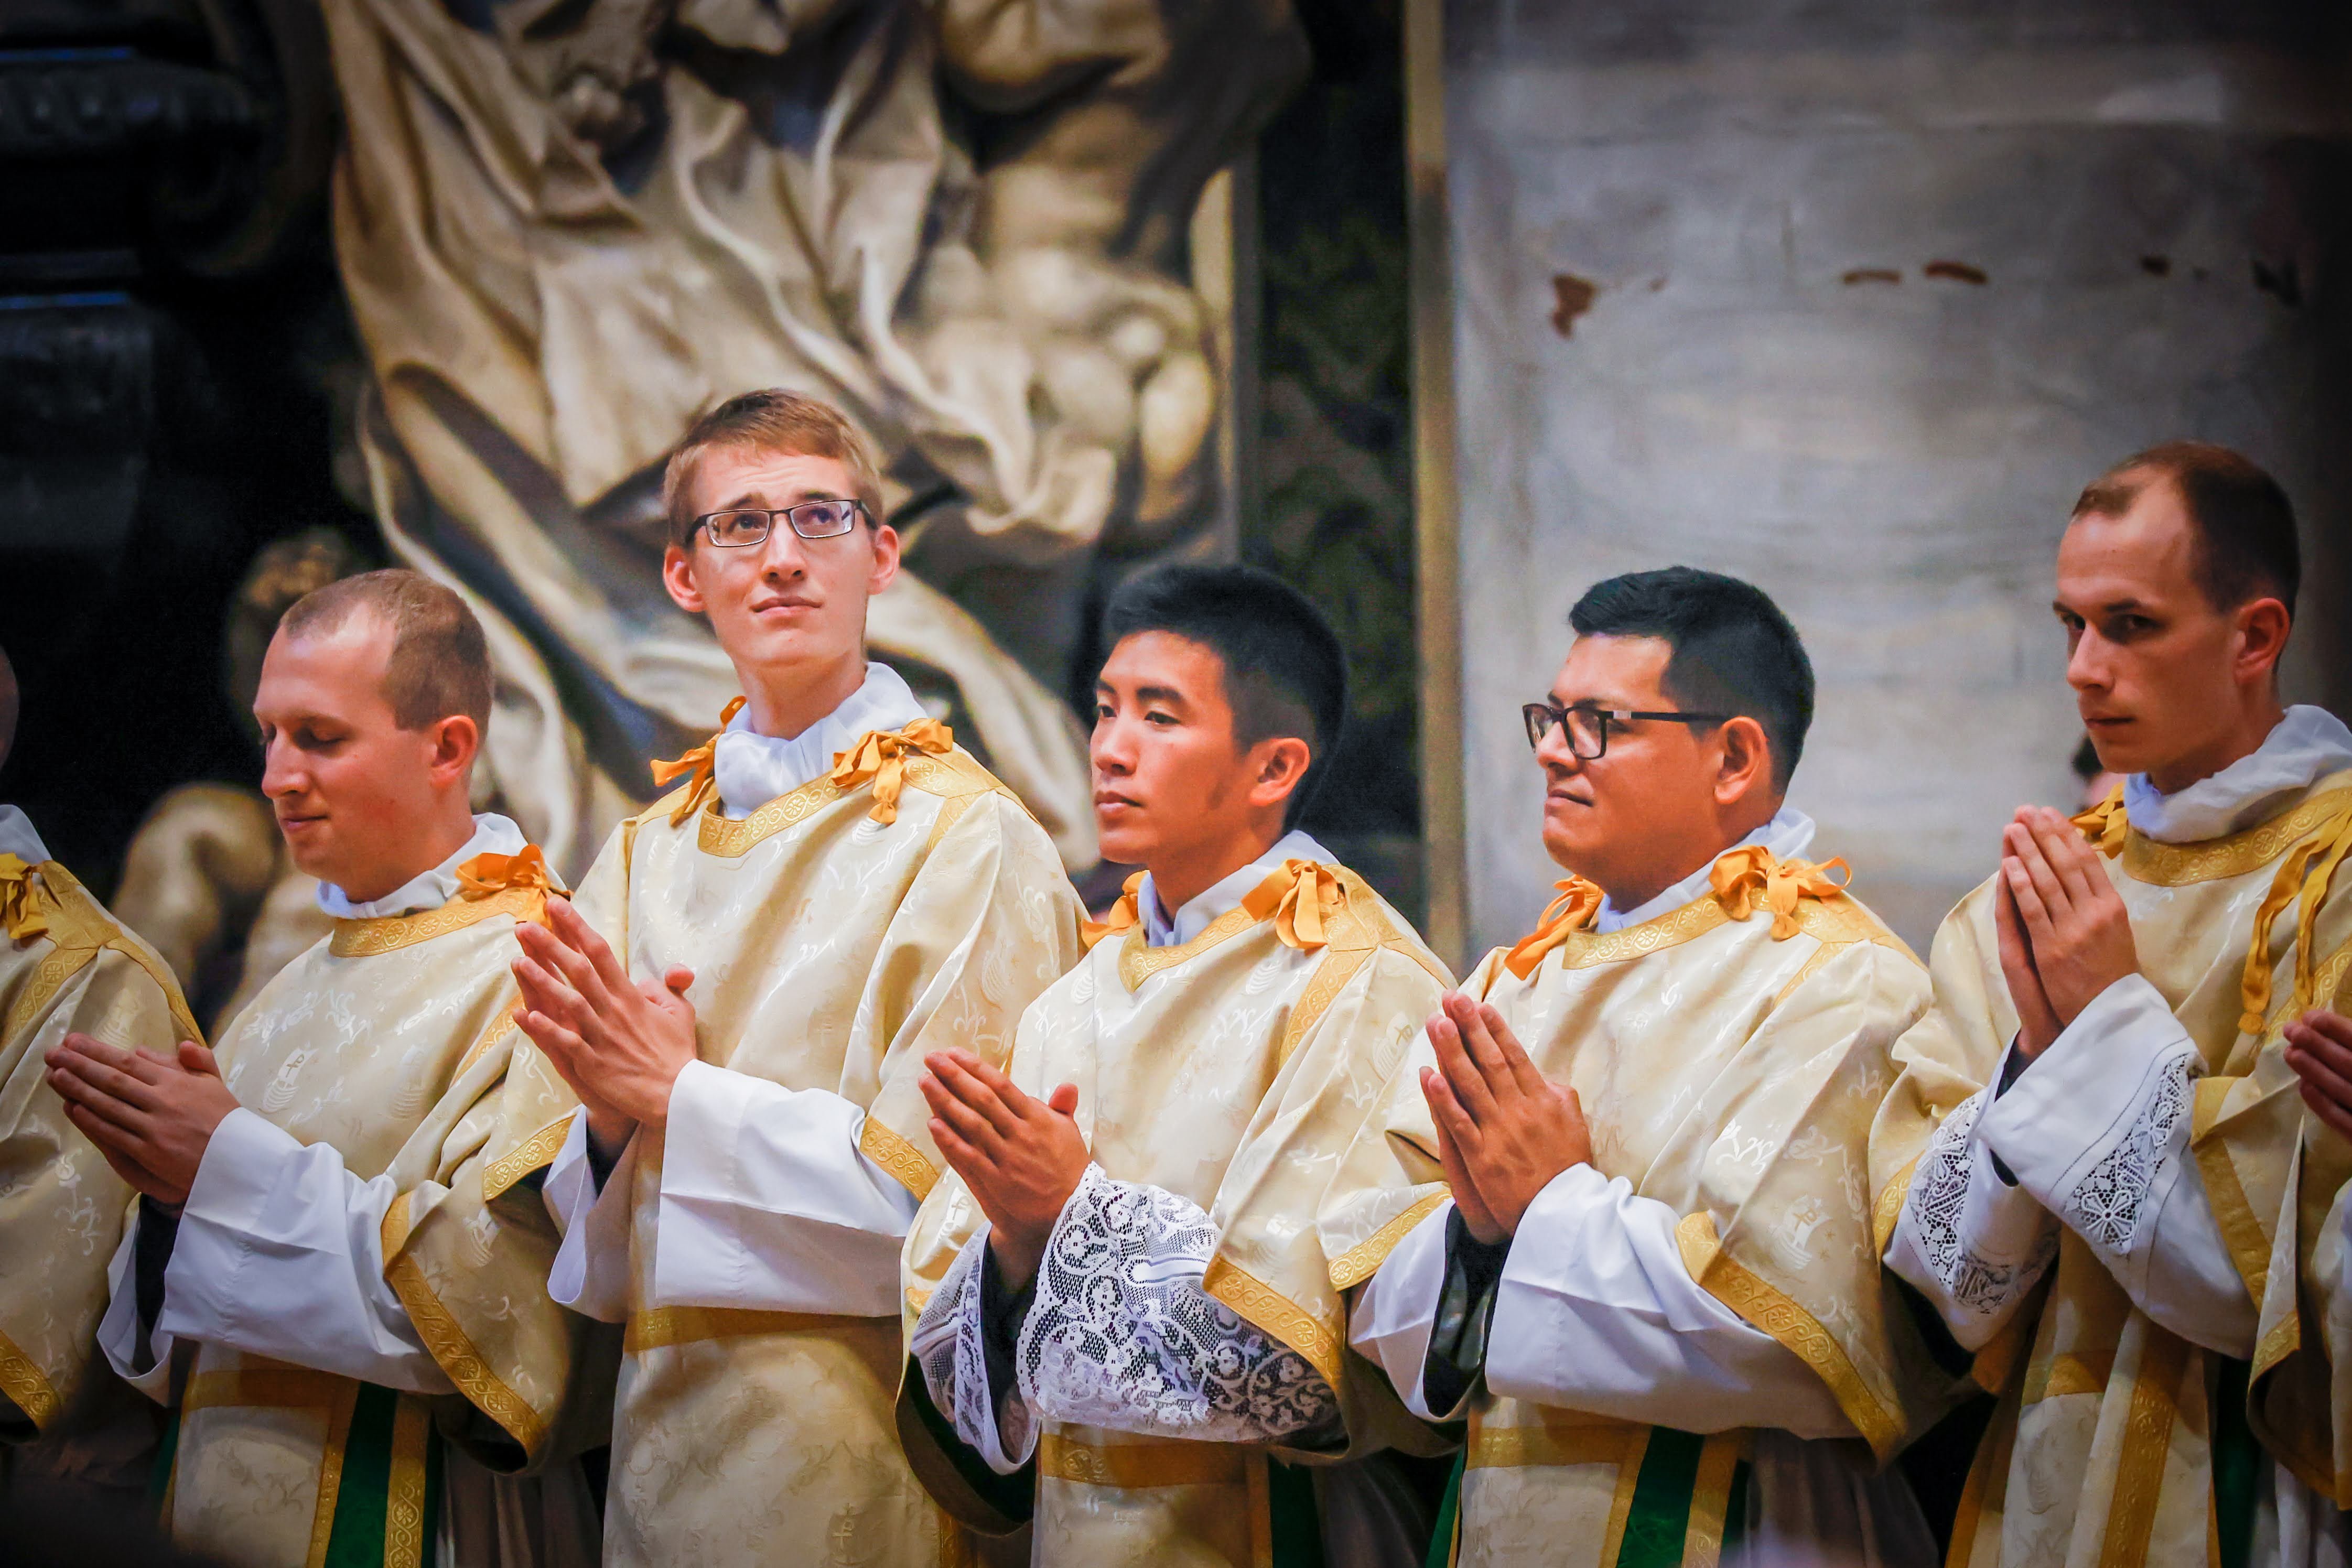 Deacon Zane Langenbrunner, second from left, at his Sept. 29, 2022, ordination as a transitional deacon in St. Peter's Basilica at the Vatican. Deacon Langenbrunner, an Indiana native, was selected to chant the Exsultet at the April 8, 2023, Easter Vigil with Pope Francis in St. Peter's Basilica. (OSV News photo/Jennifer Barton, Today's Catholic)